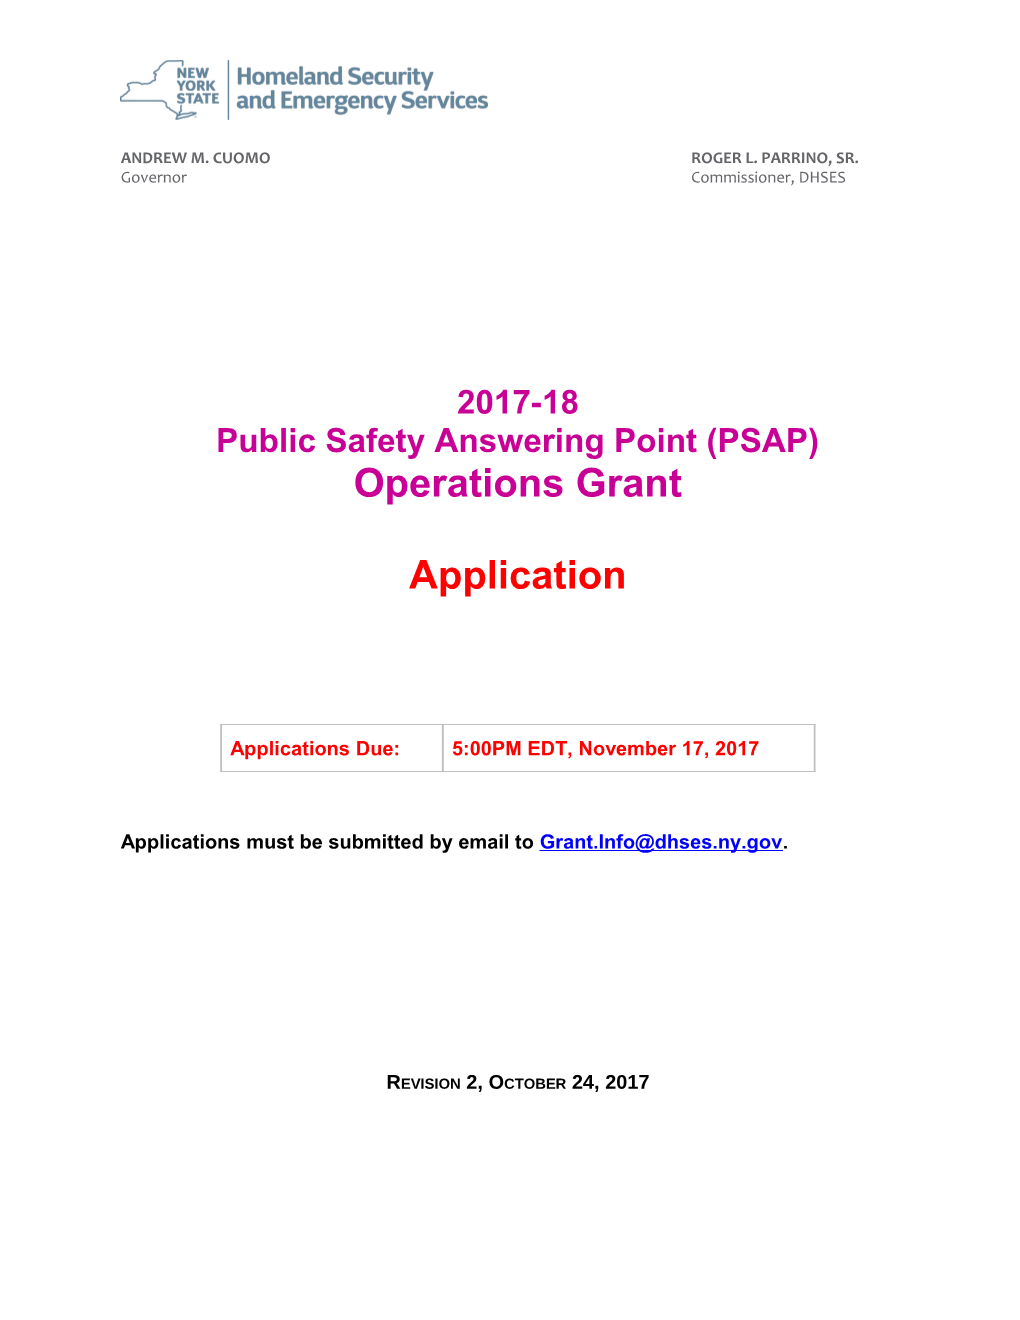 Public Safety Answering Point (PSAP) Operations Grant